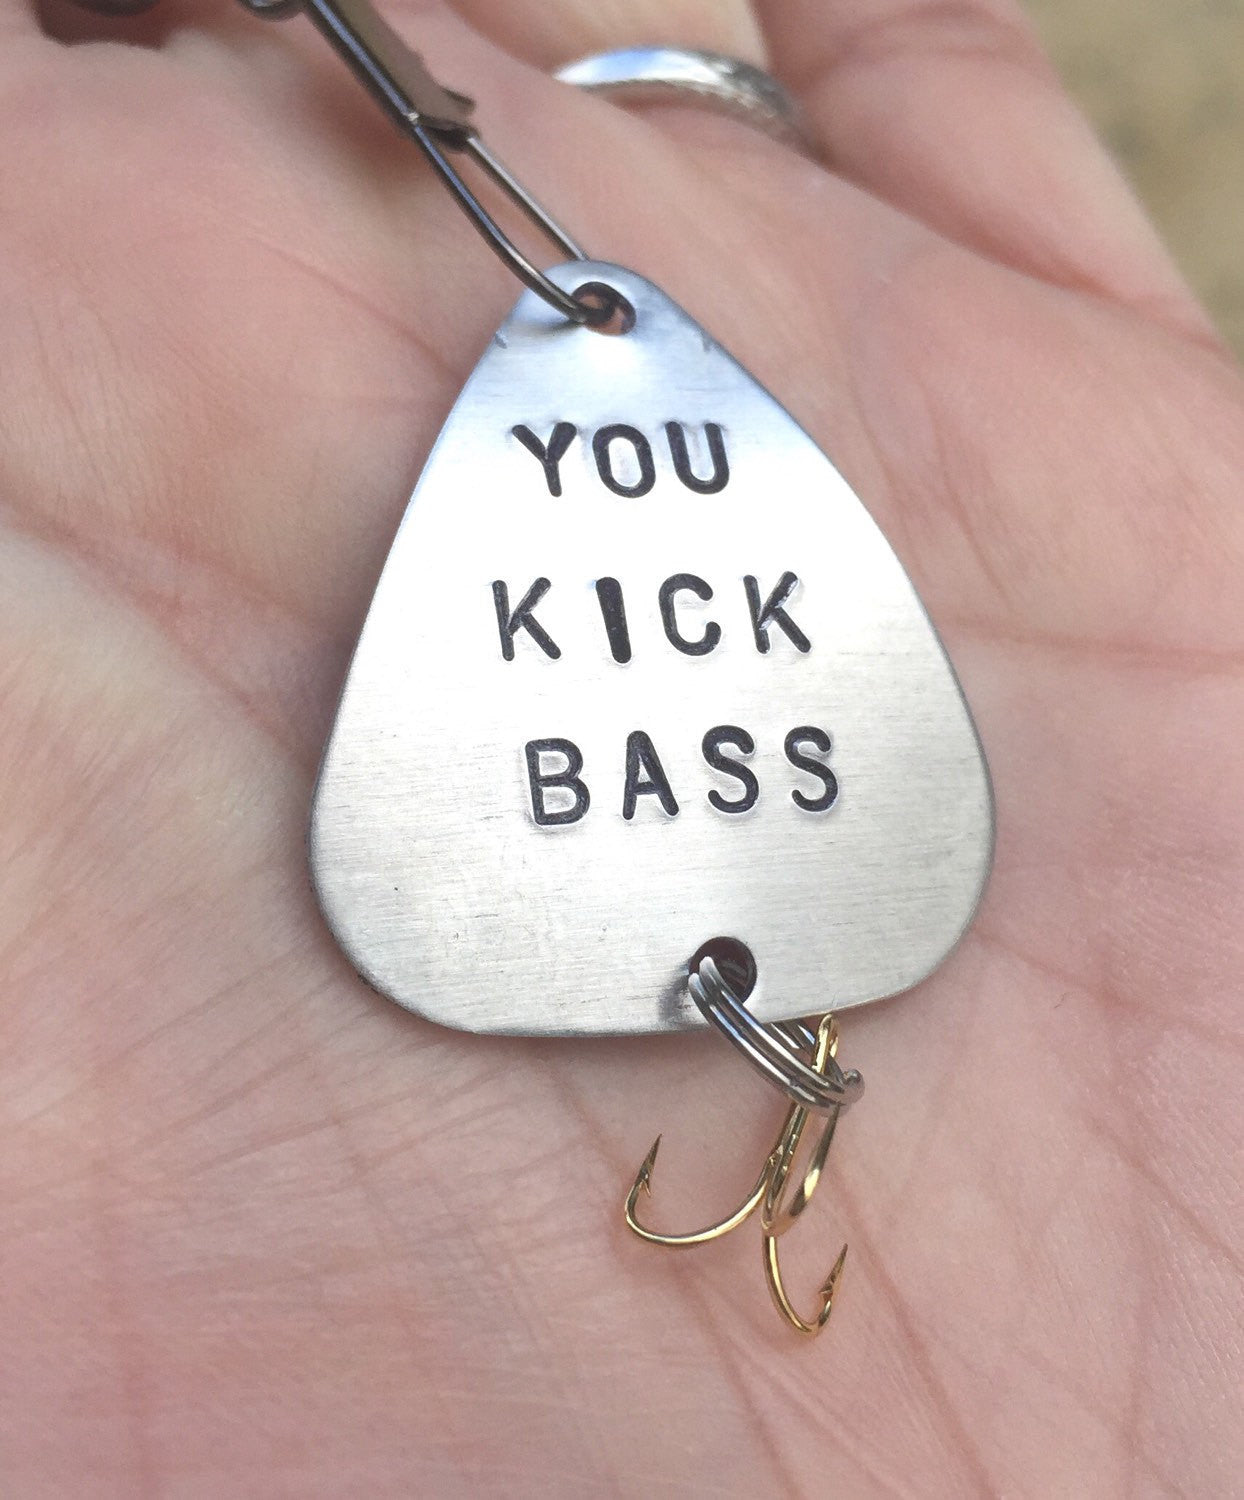 Fishing Lure,Fathers Day Gift, Gift,You Kick Bass, For Him, Boyfriend